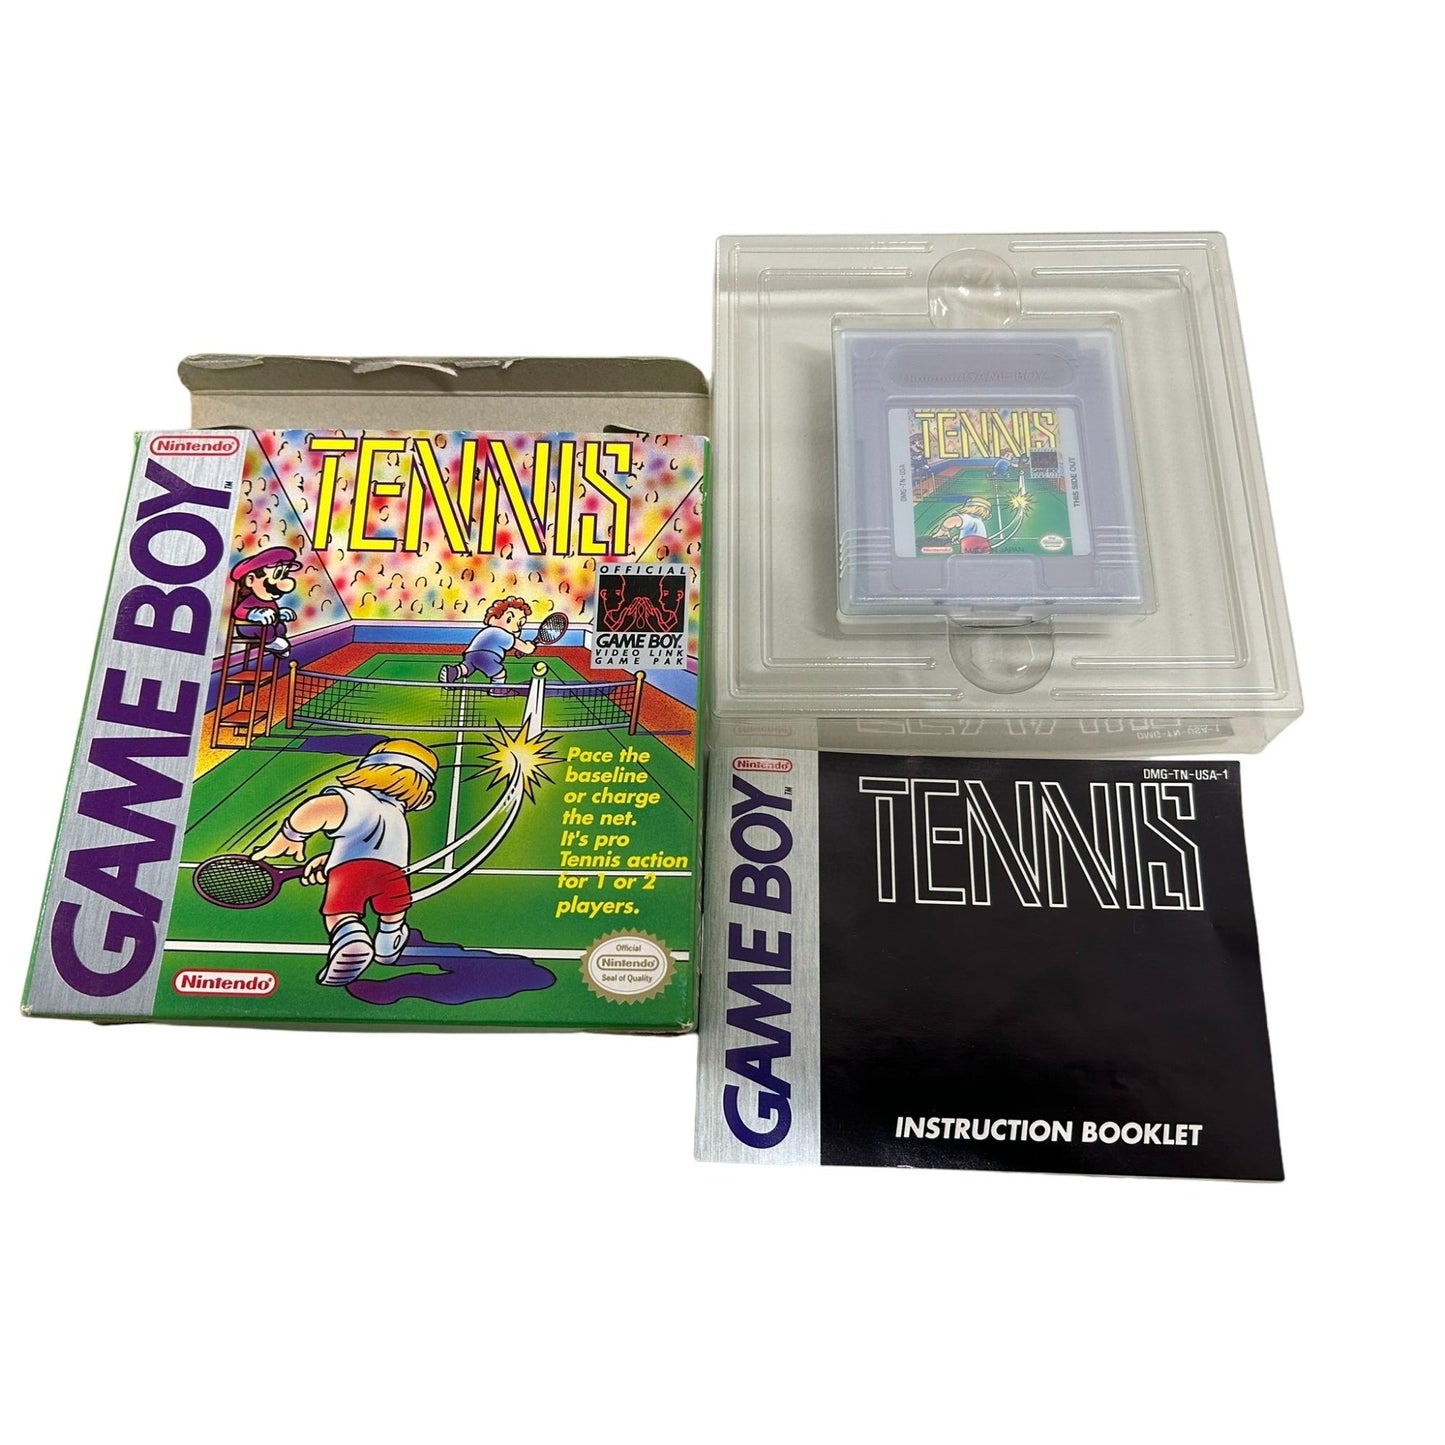 Gameboy Tennis (Nintendo, 1989) Green background, complete with game and manual